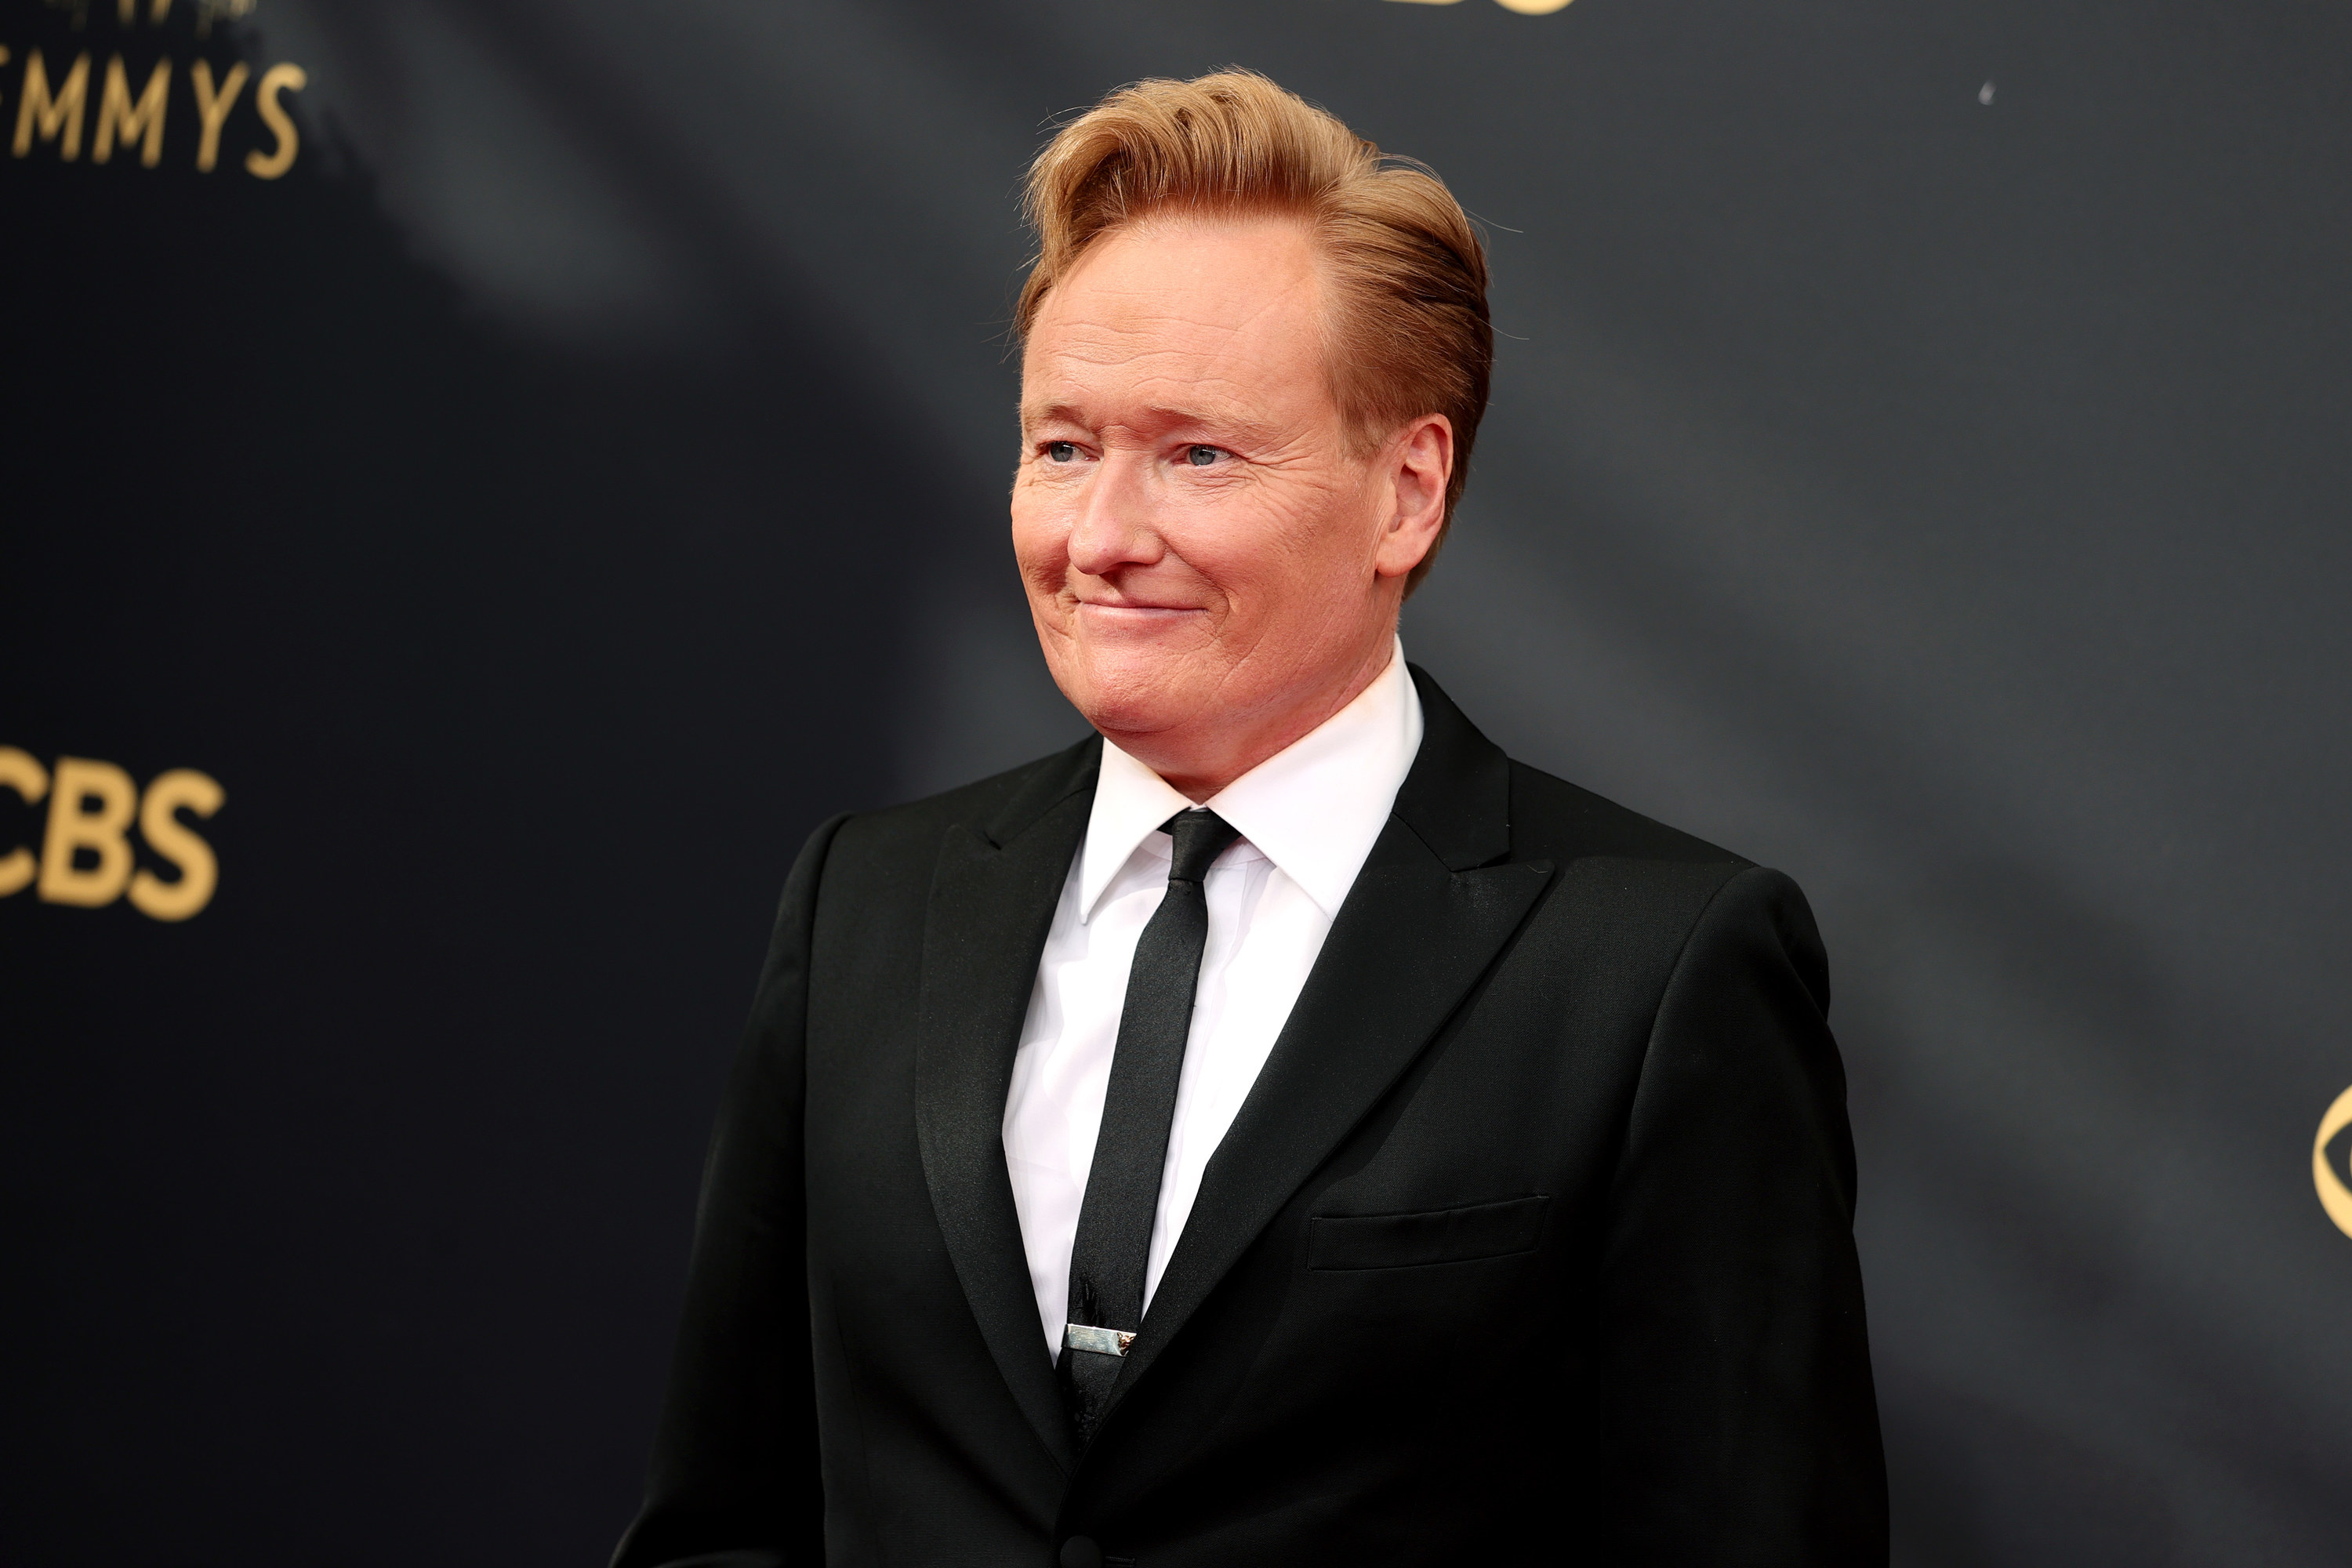 Conan OBrien smiling on the red carpet